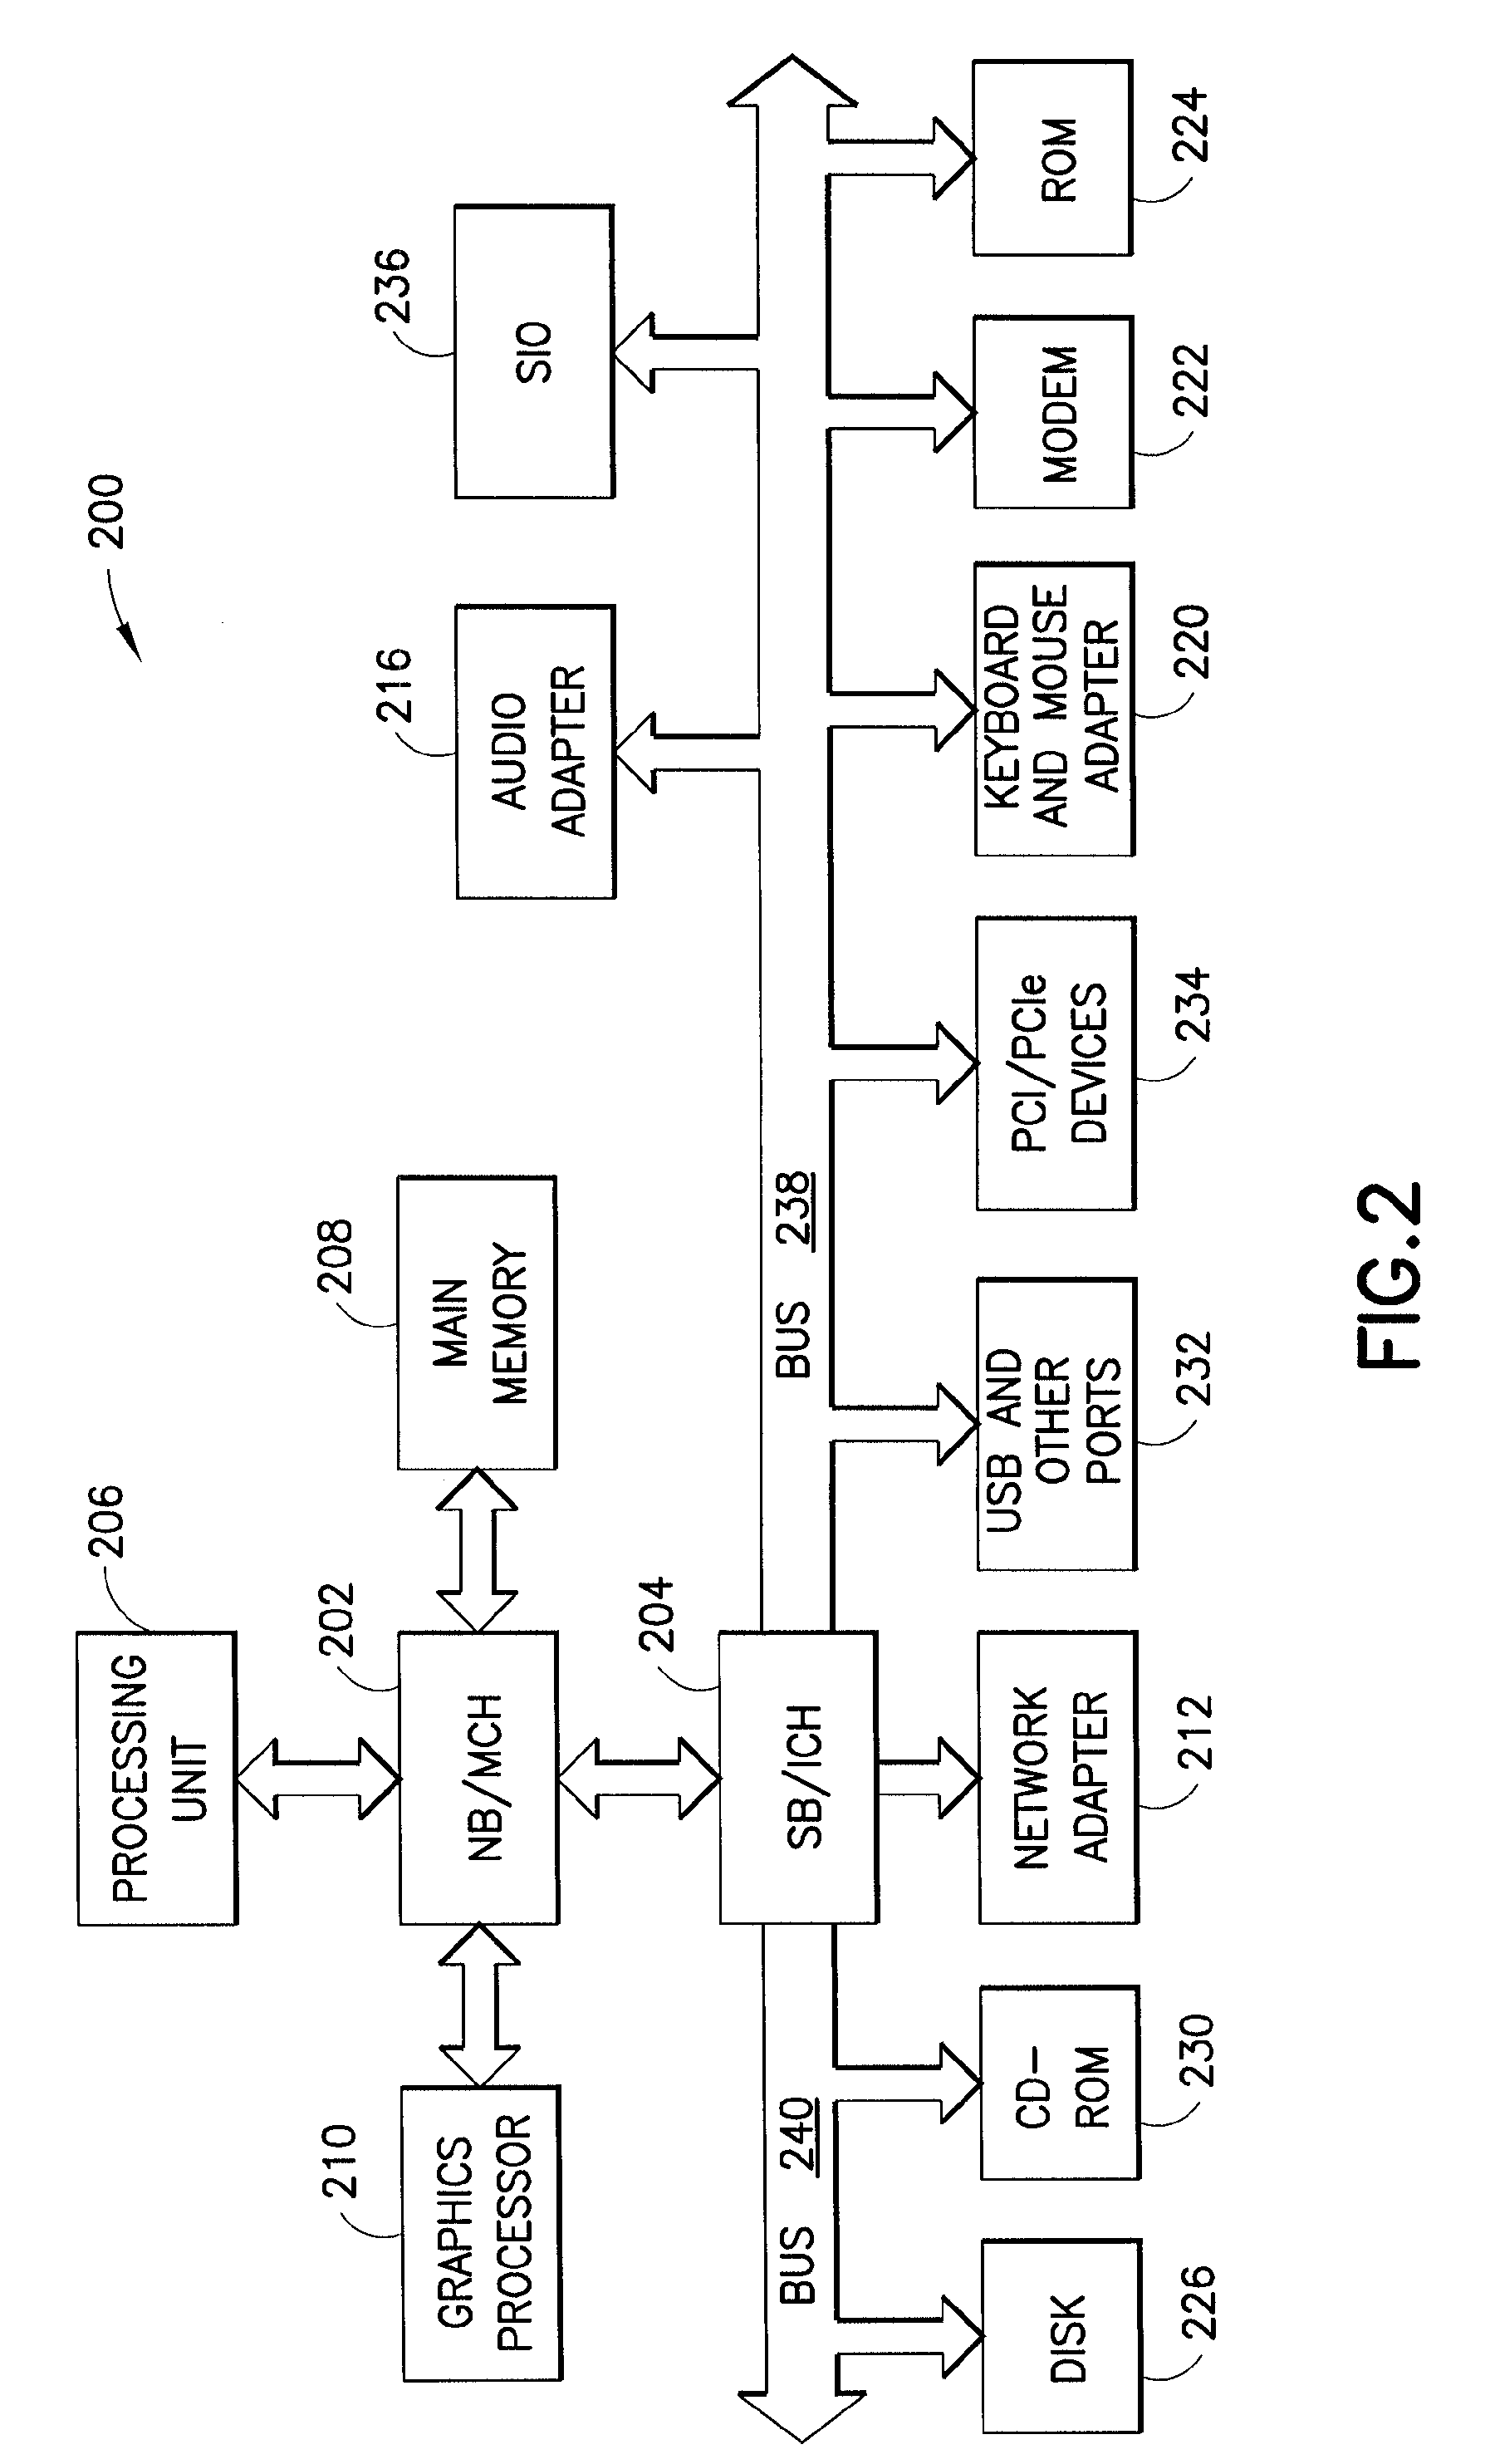 System and Method for Semantic Normalization of Healthcare Data to Support Derivation Conformed Dimensions to Support Static and Aggregate Valuation Across Heterogeneous Data Sources